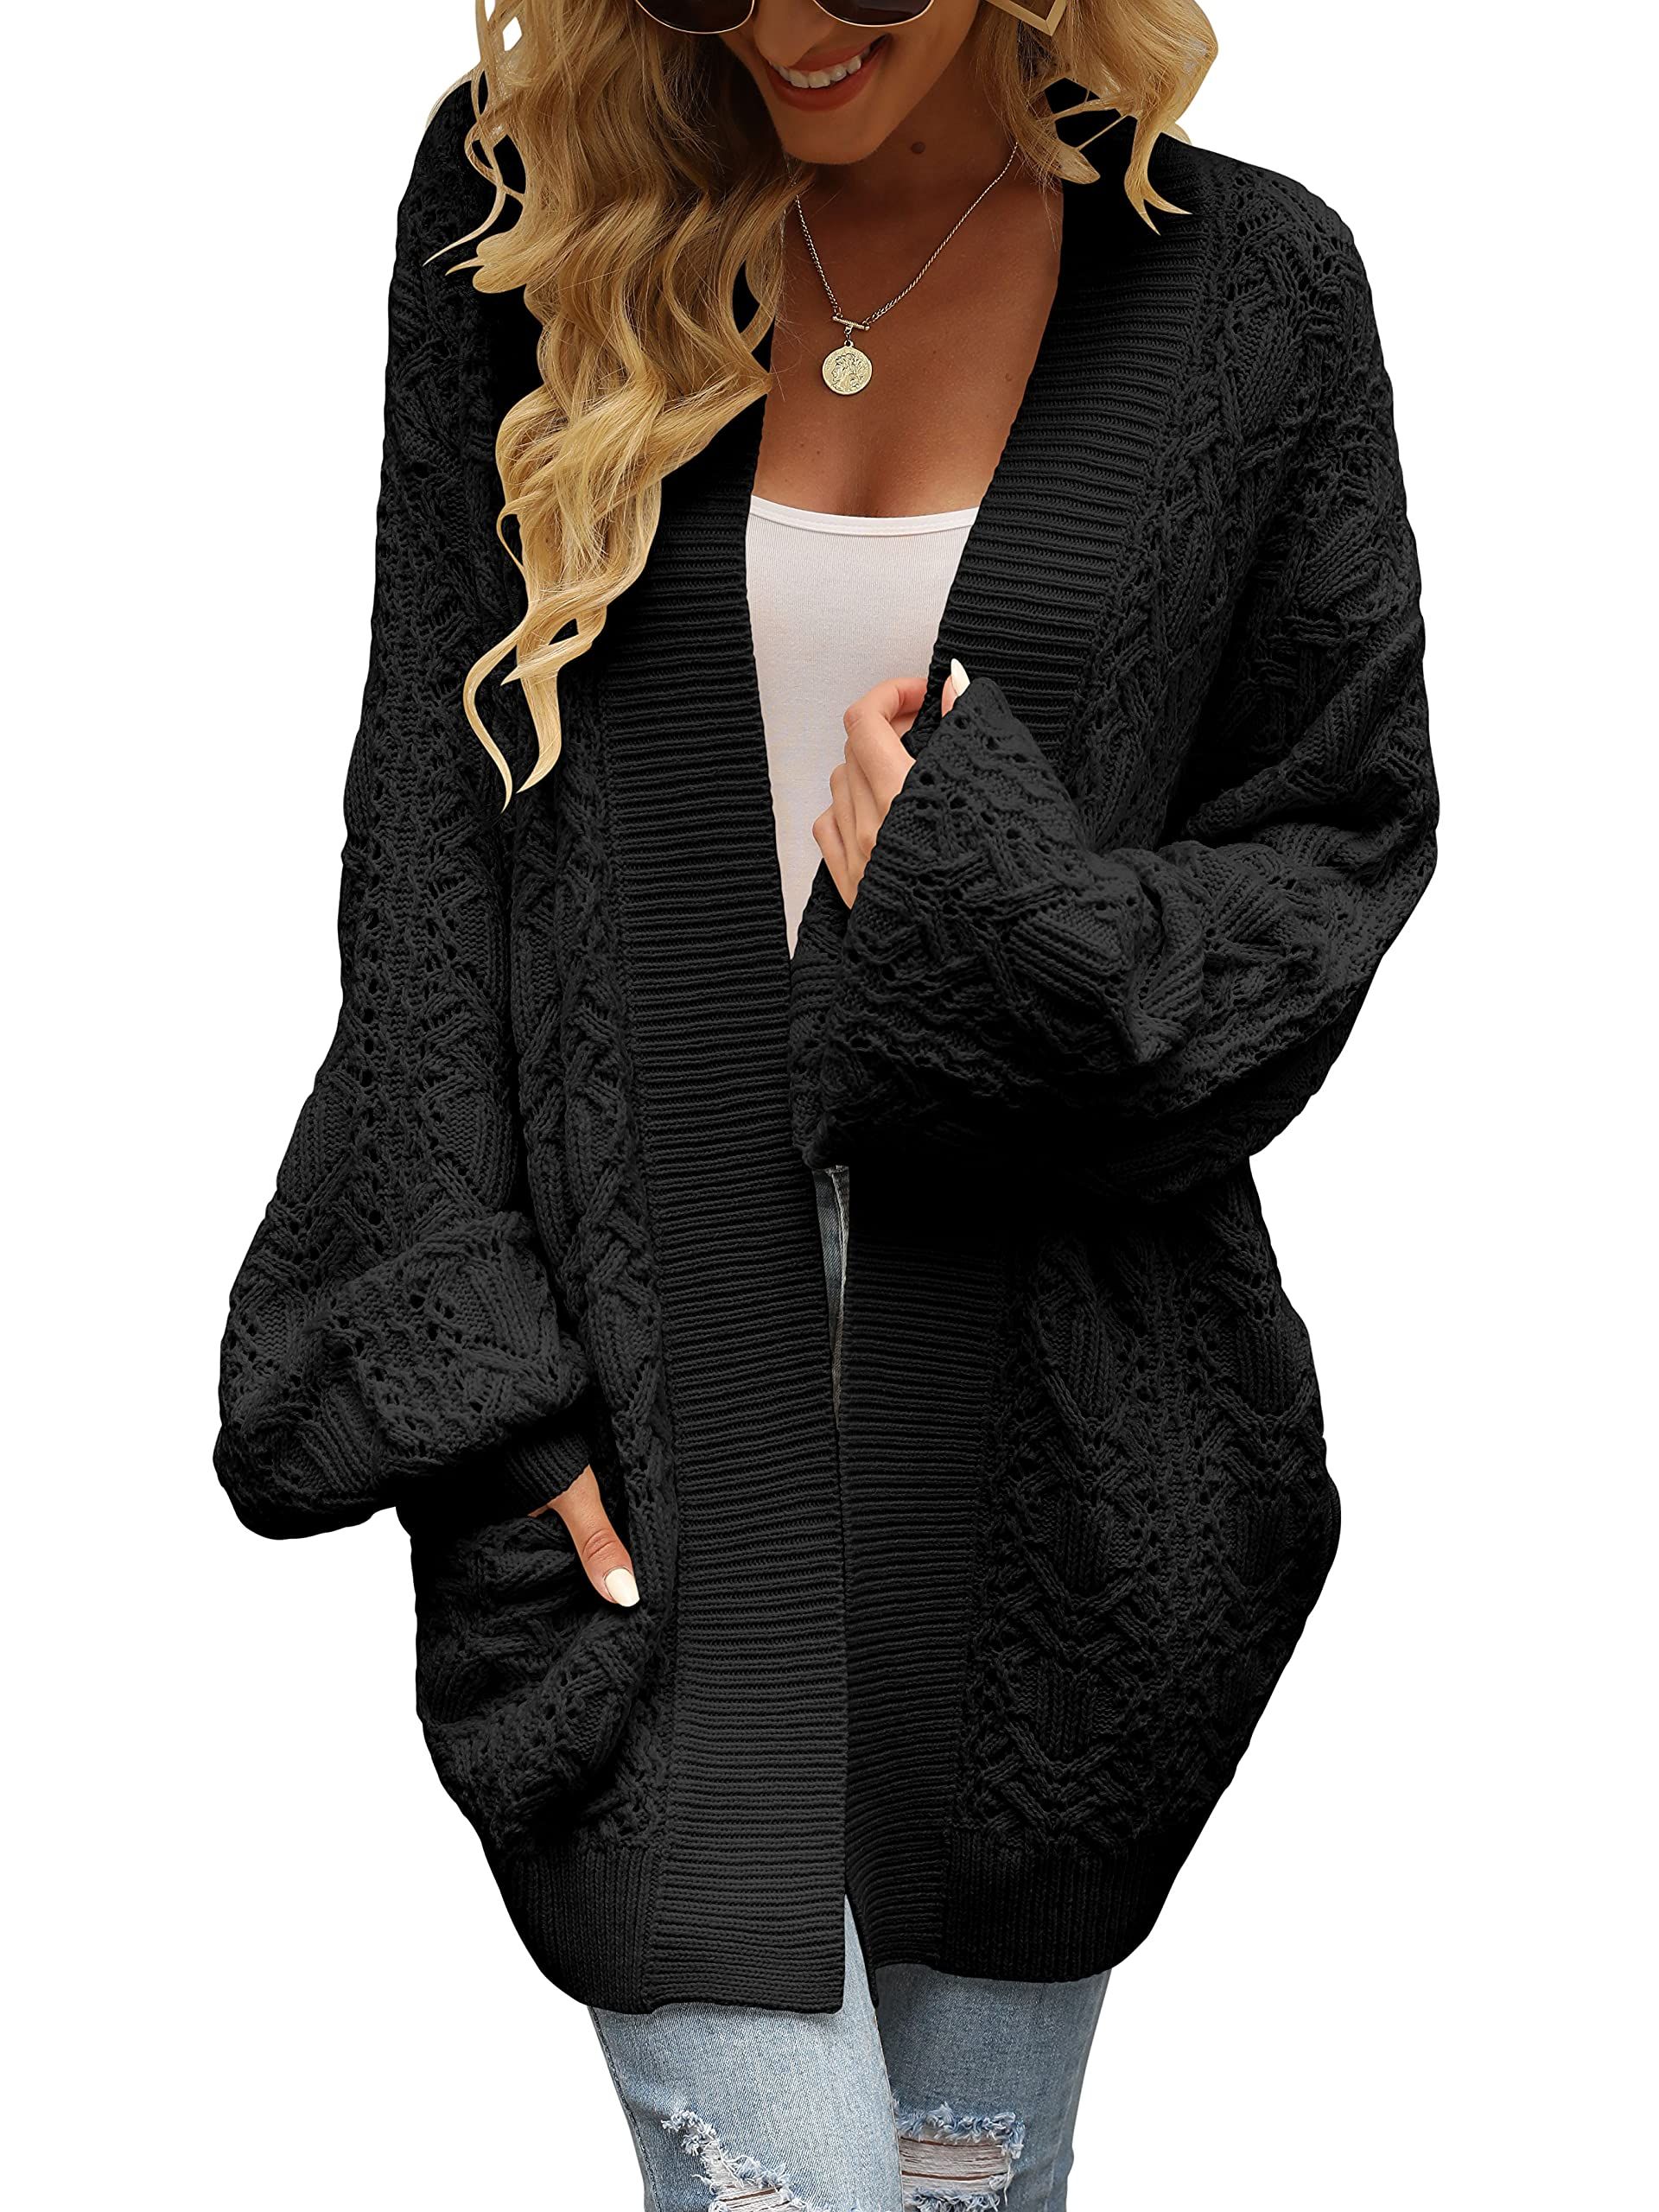 ANRABESS Women's Long Sleeve Cable Knit Open Front Boho Crochet Oversized Casual Cardigan Sweater Ou | Amazon (US)